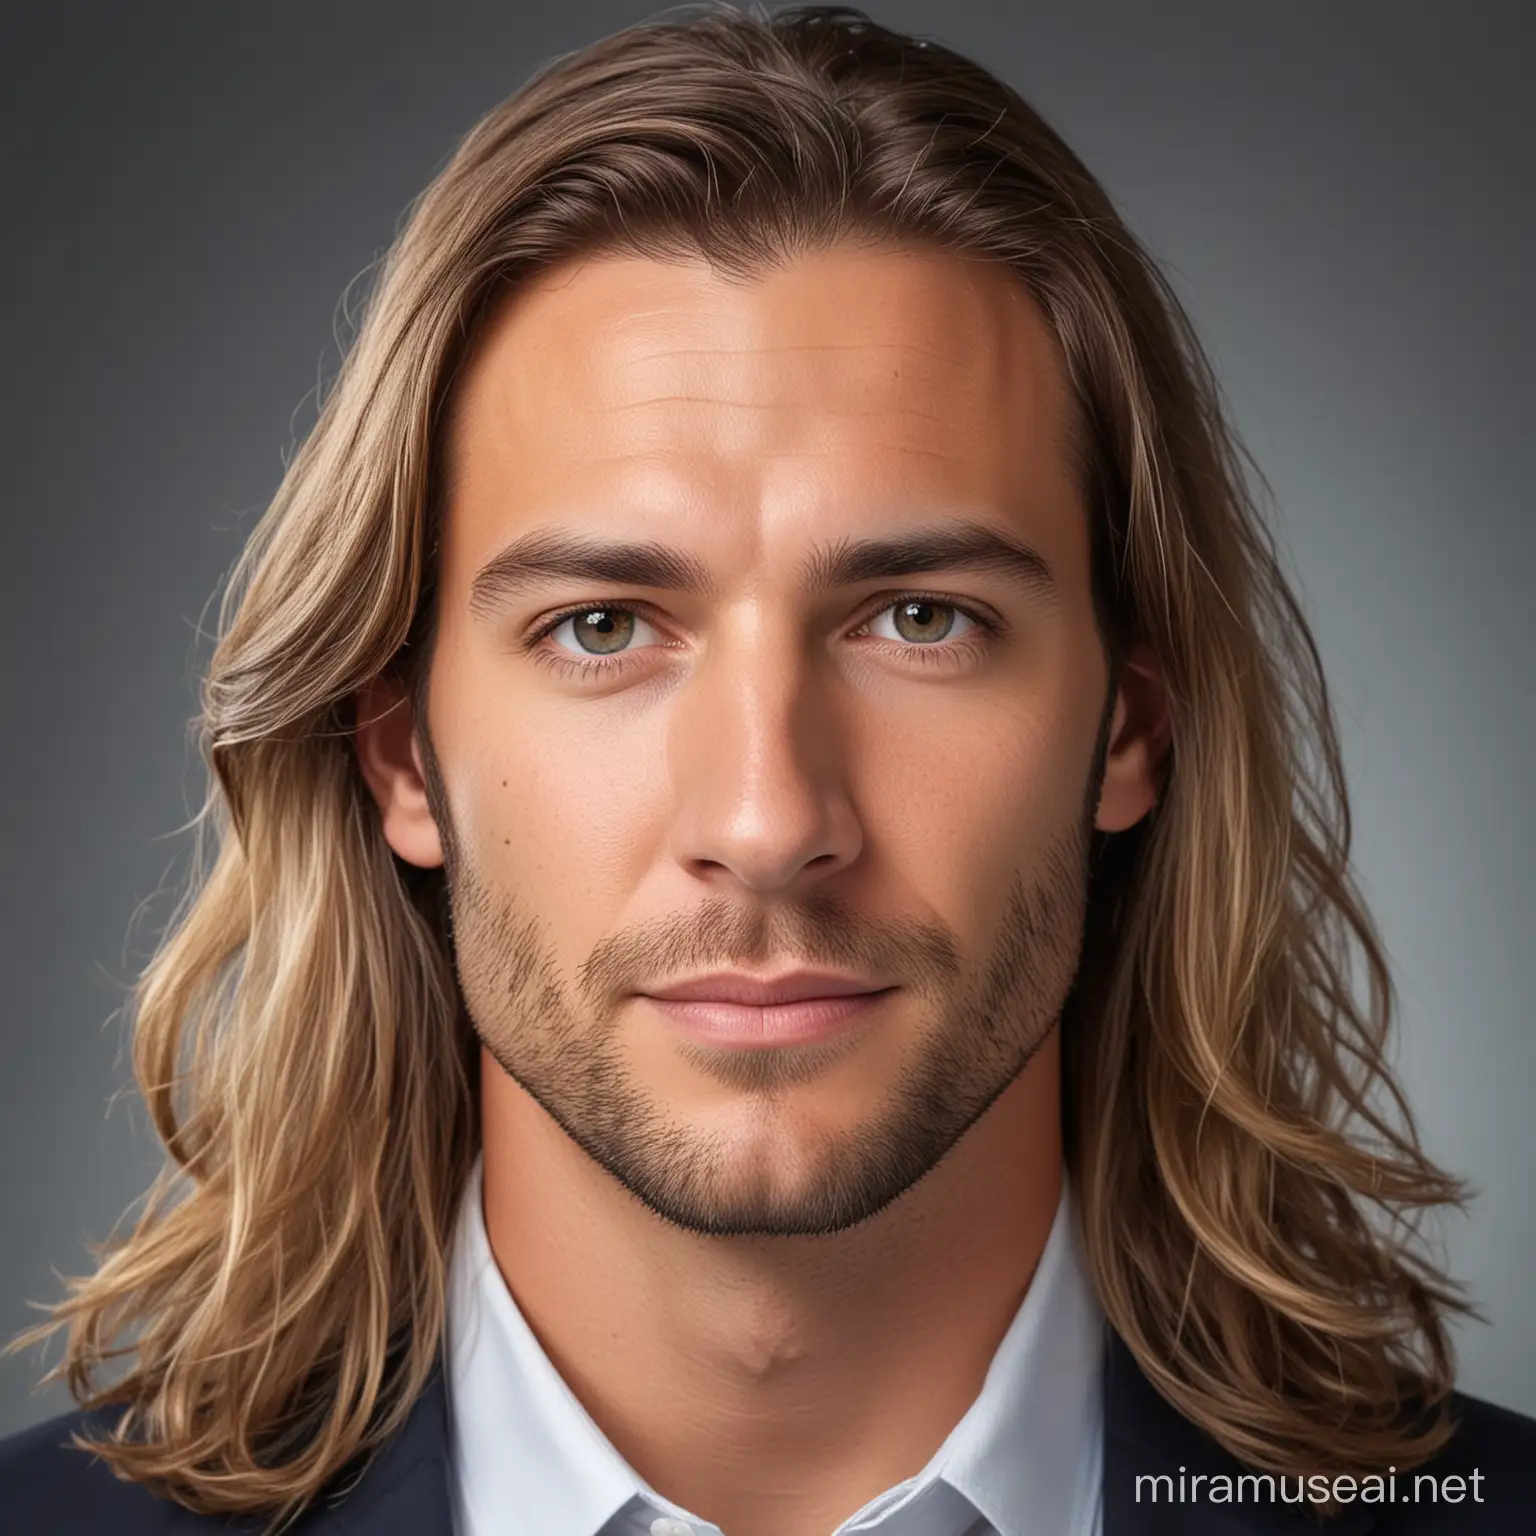 Professional Headshot Confident Man with Long Hair